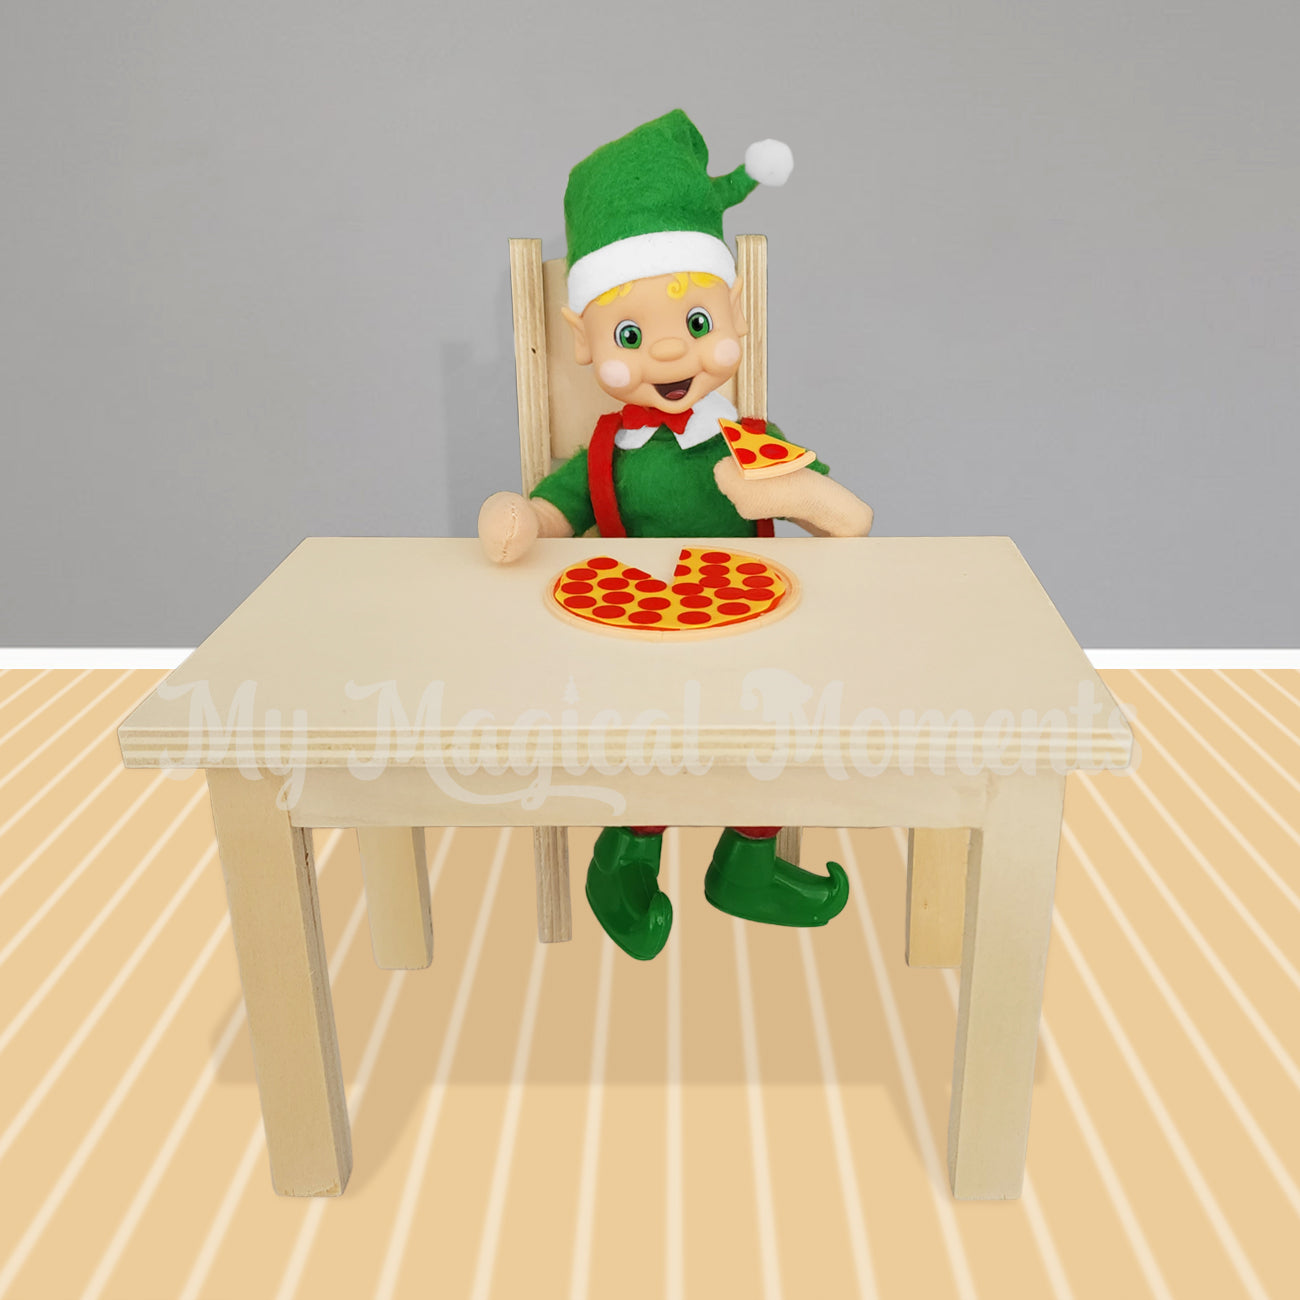 Elf siting at a miniature dining table eating pizza prop